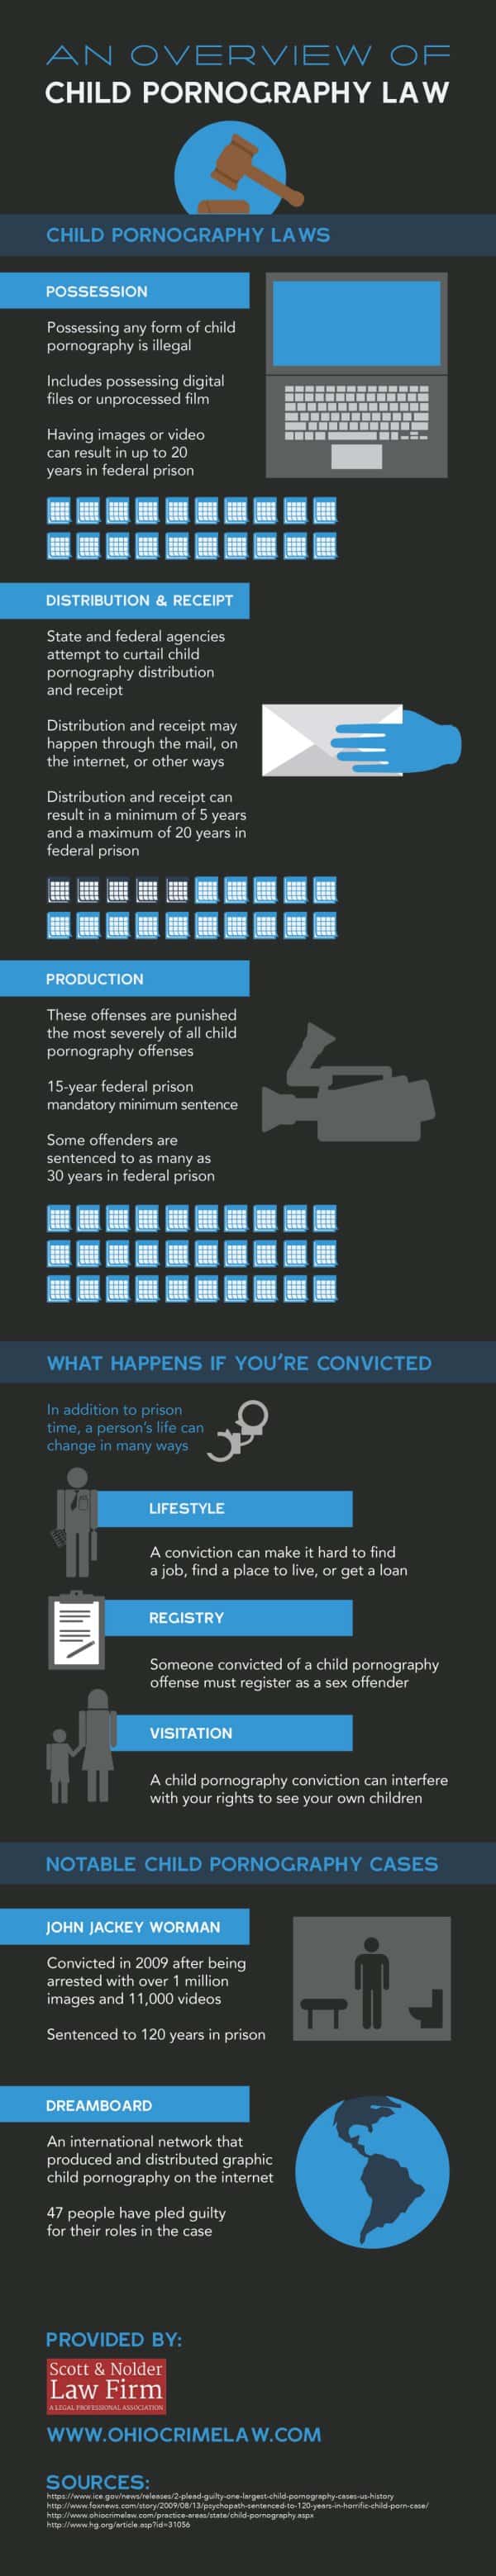 Baby Pornography - An Overview of Child Pornography Law [Infographic]